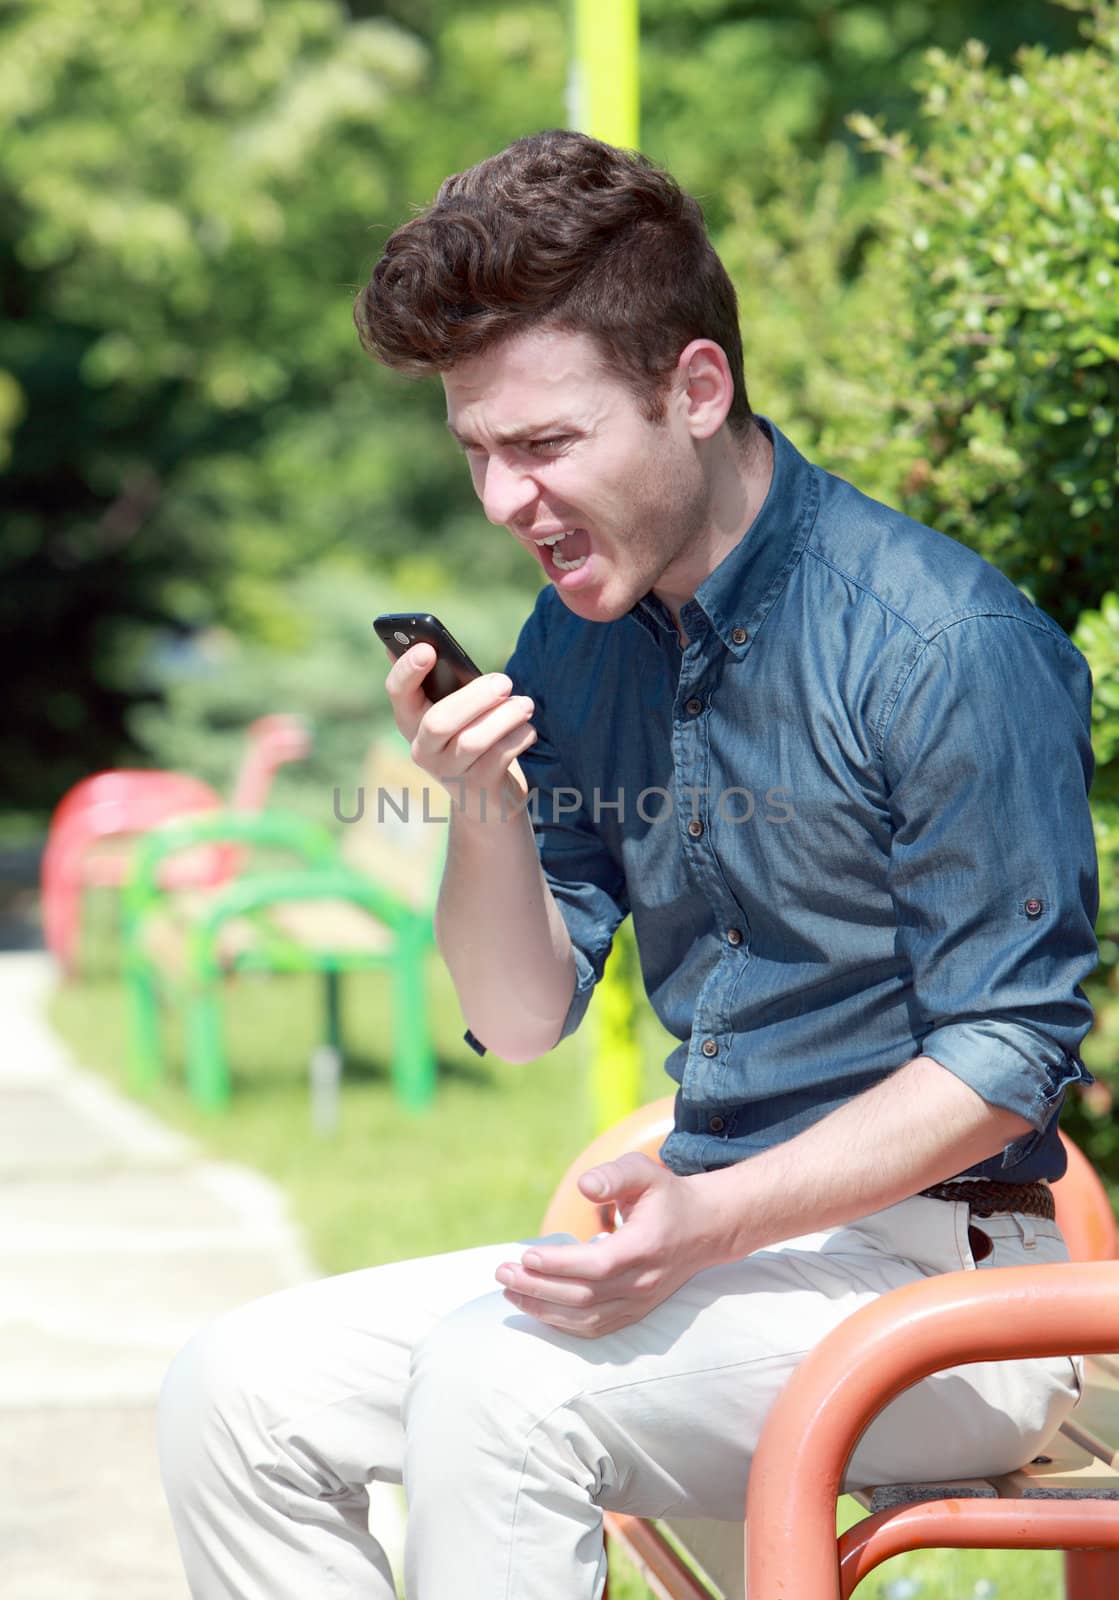 Youn russian man shouting on telephone in park